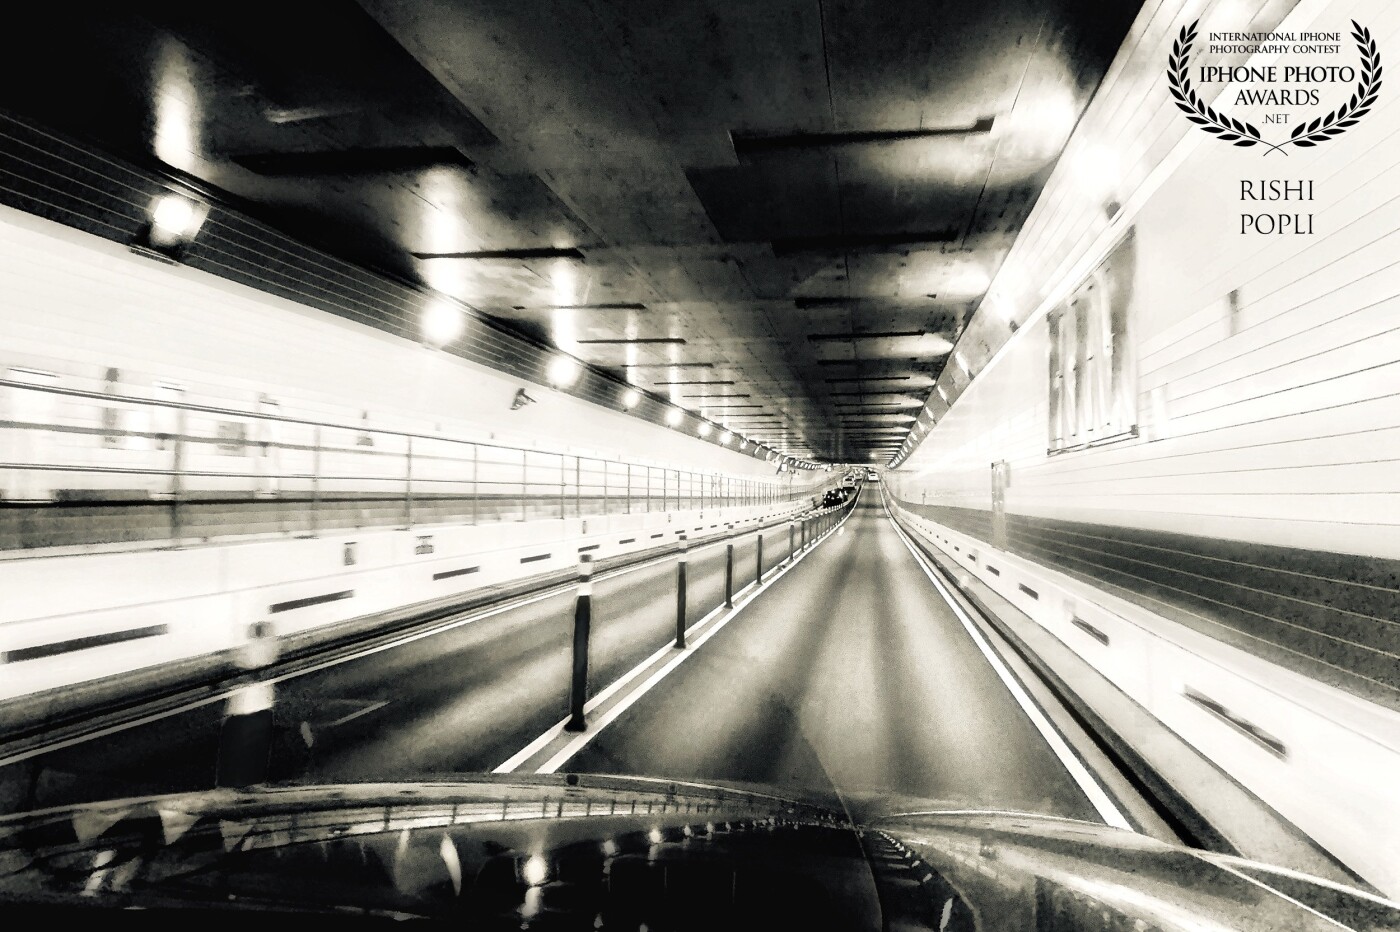 Driving down after an evening of fun and drinks with the people I love from @PinderWinery in LongIsland, New York. I took this picture from the passenger seat of my car while driving through the Midtown Tunnel. 